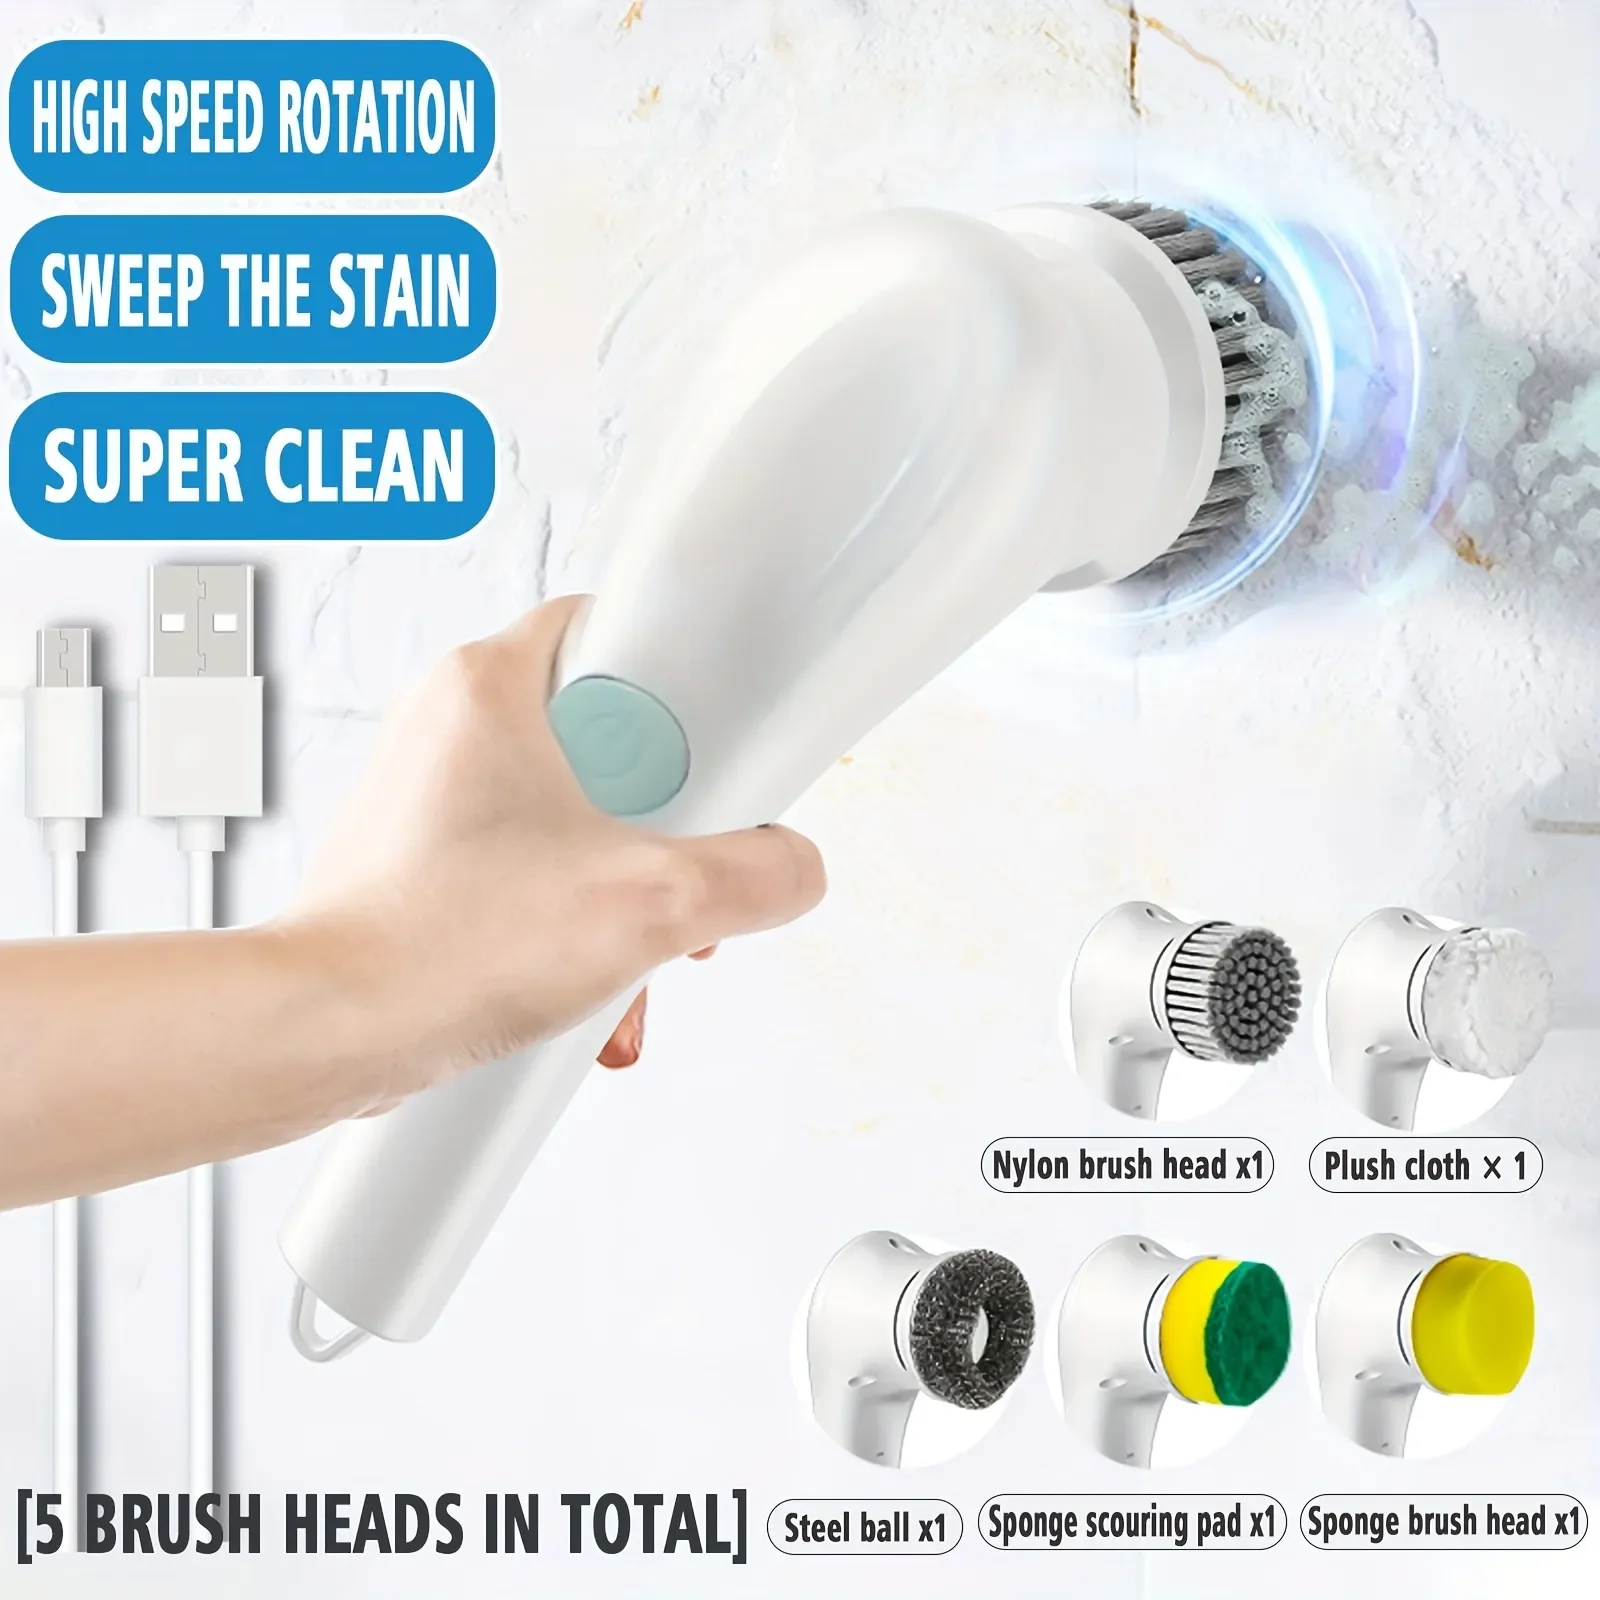 5-in-1Multifunctional Electric Cleaning Brush usb charging Bathroom Wash Brush Kitchen Cleaning Tool Dishwashing Brush 1pcs kitchen cleaning brush soft dishwashing brush fruit vegetable cleaning brushes pot pan sponge scouring pads tool